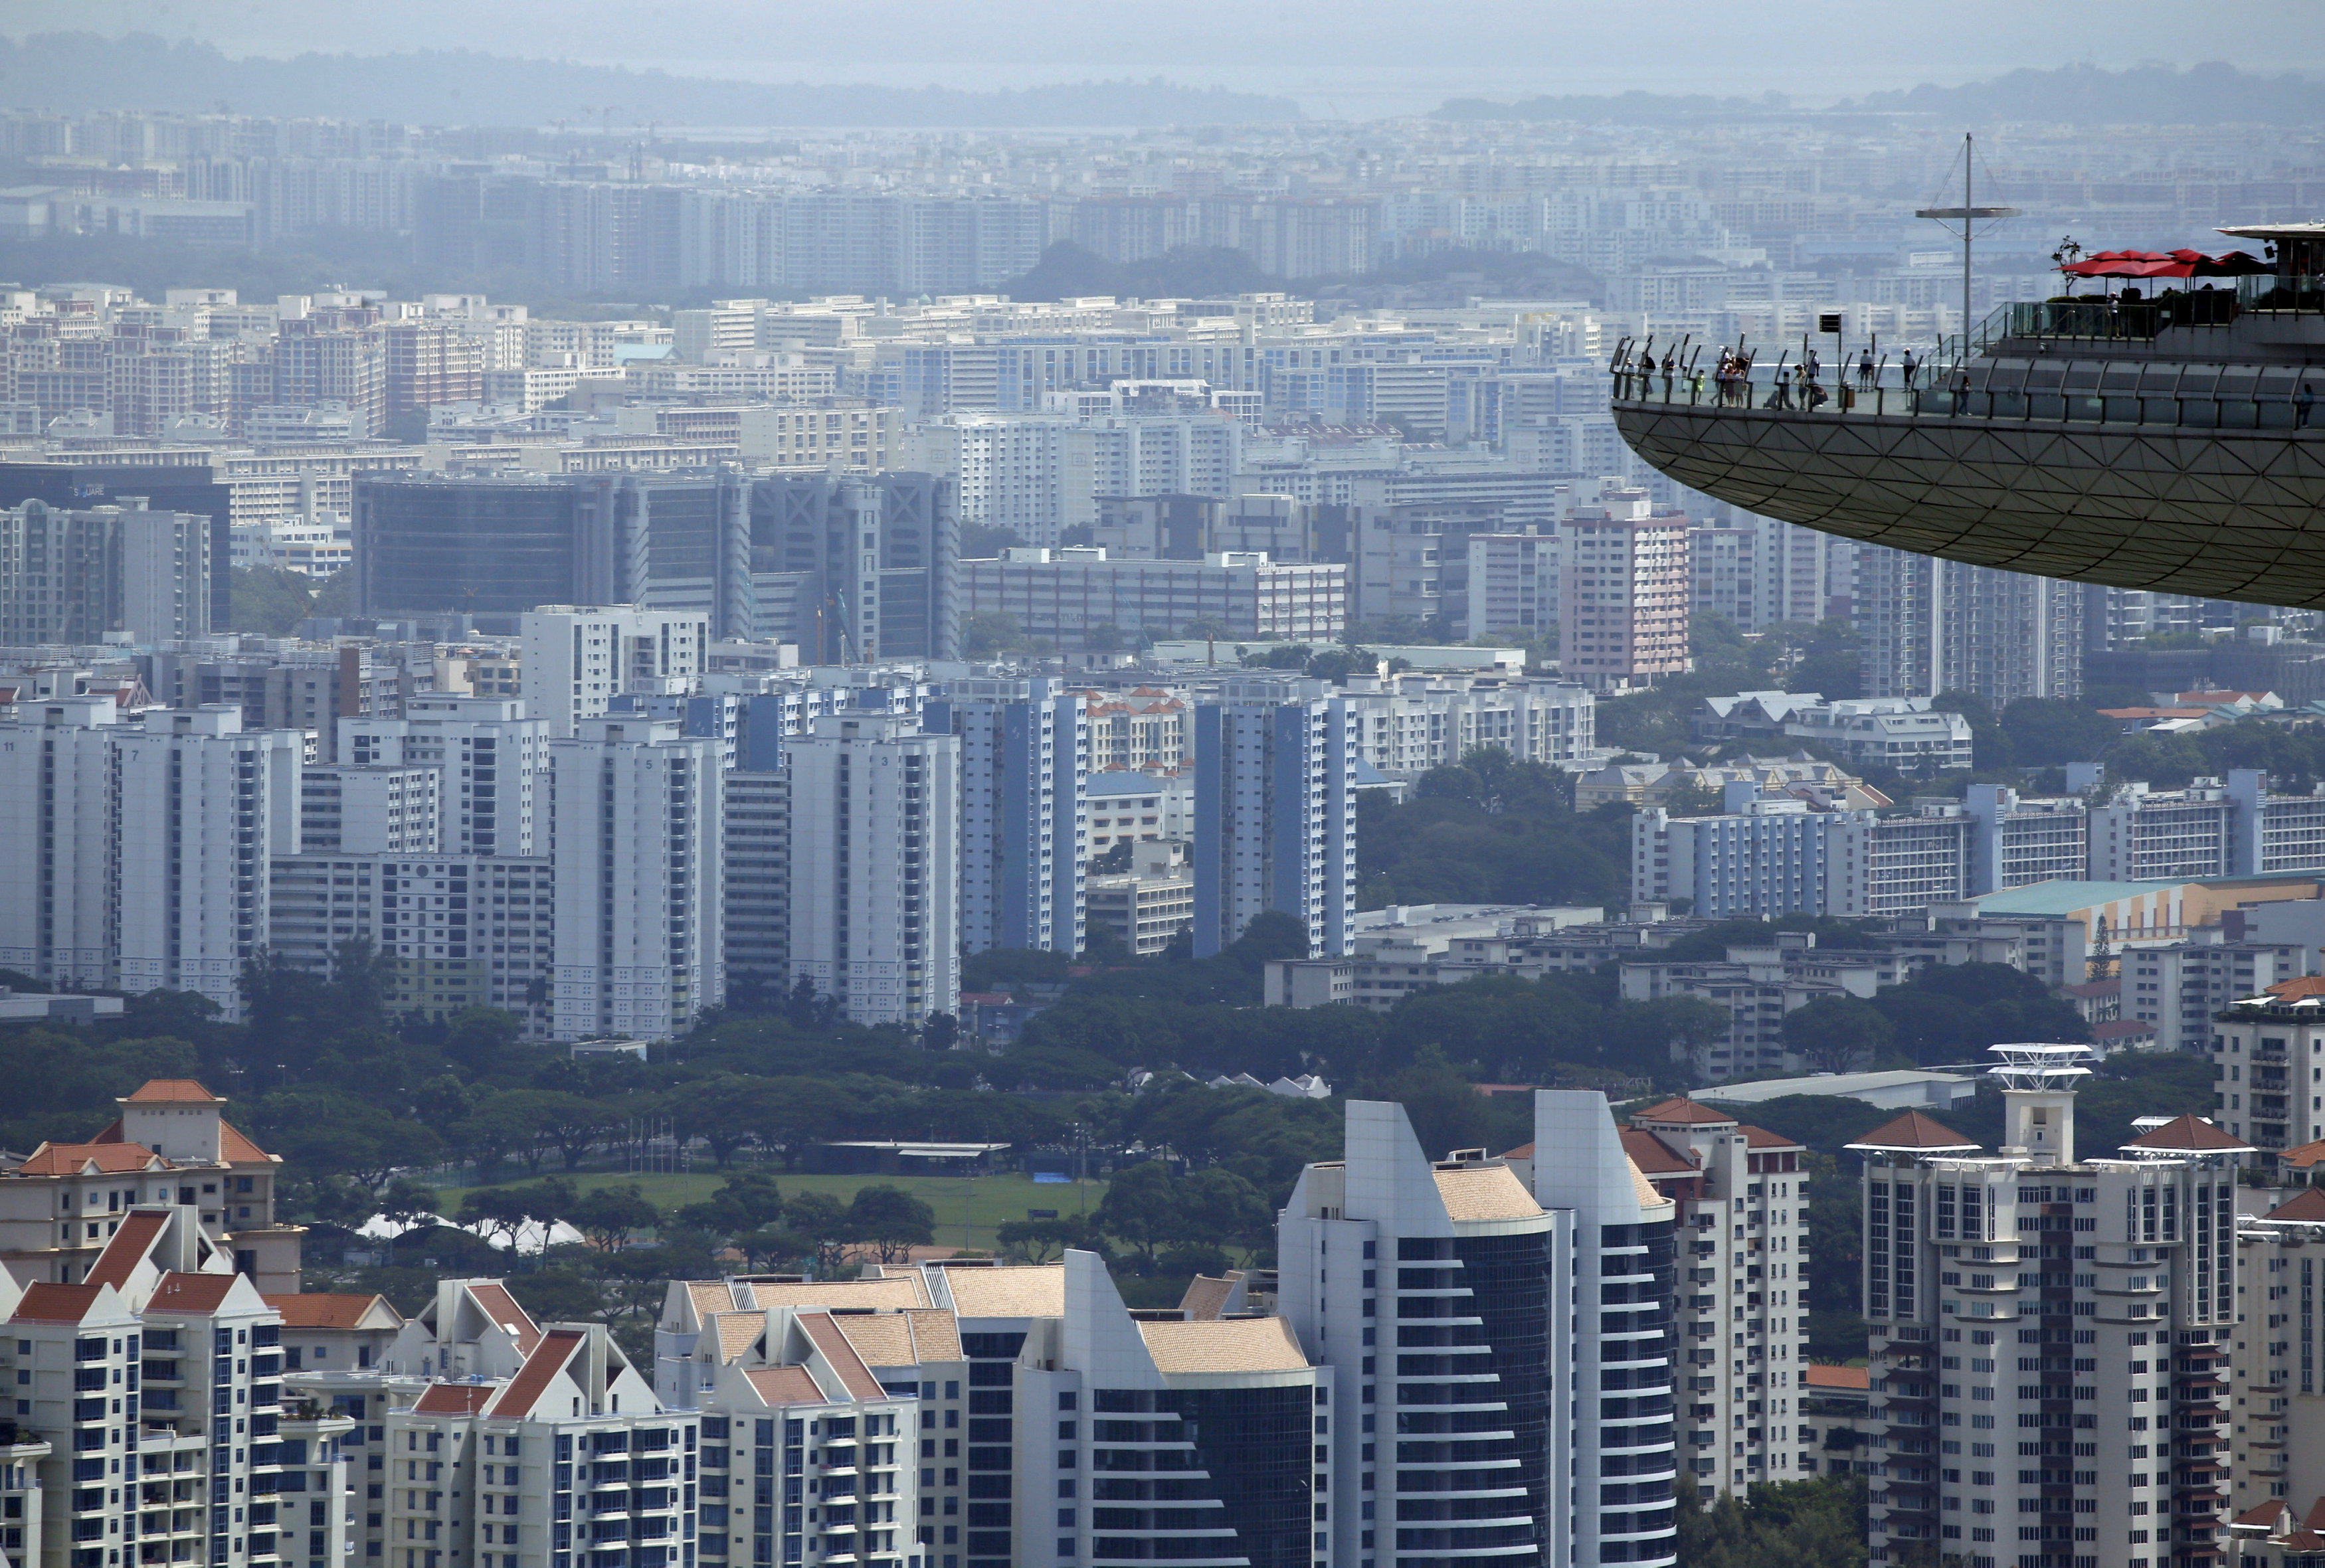 People look out from the observation tower of the Marina Bay Sands amongst public and private residential apartment buildings in Singapore on February 22, 2016. Economies of Southeast Asian nations are feeling the effects of China’s own slowdown. Photo: Reuters